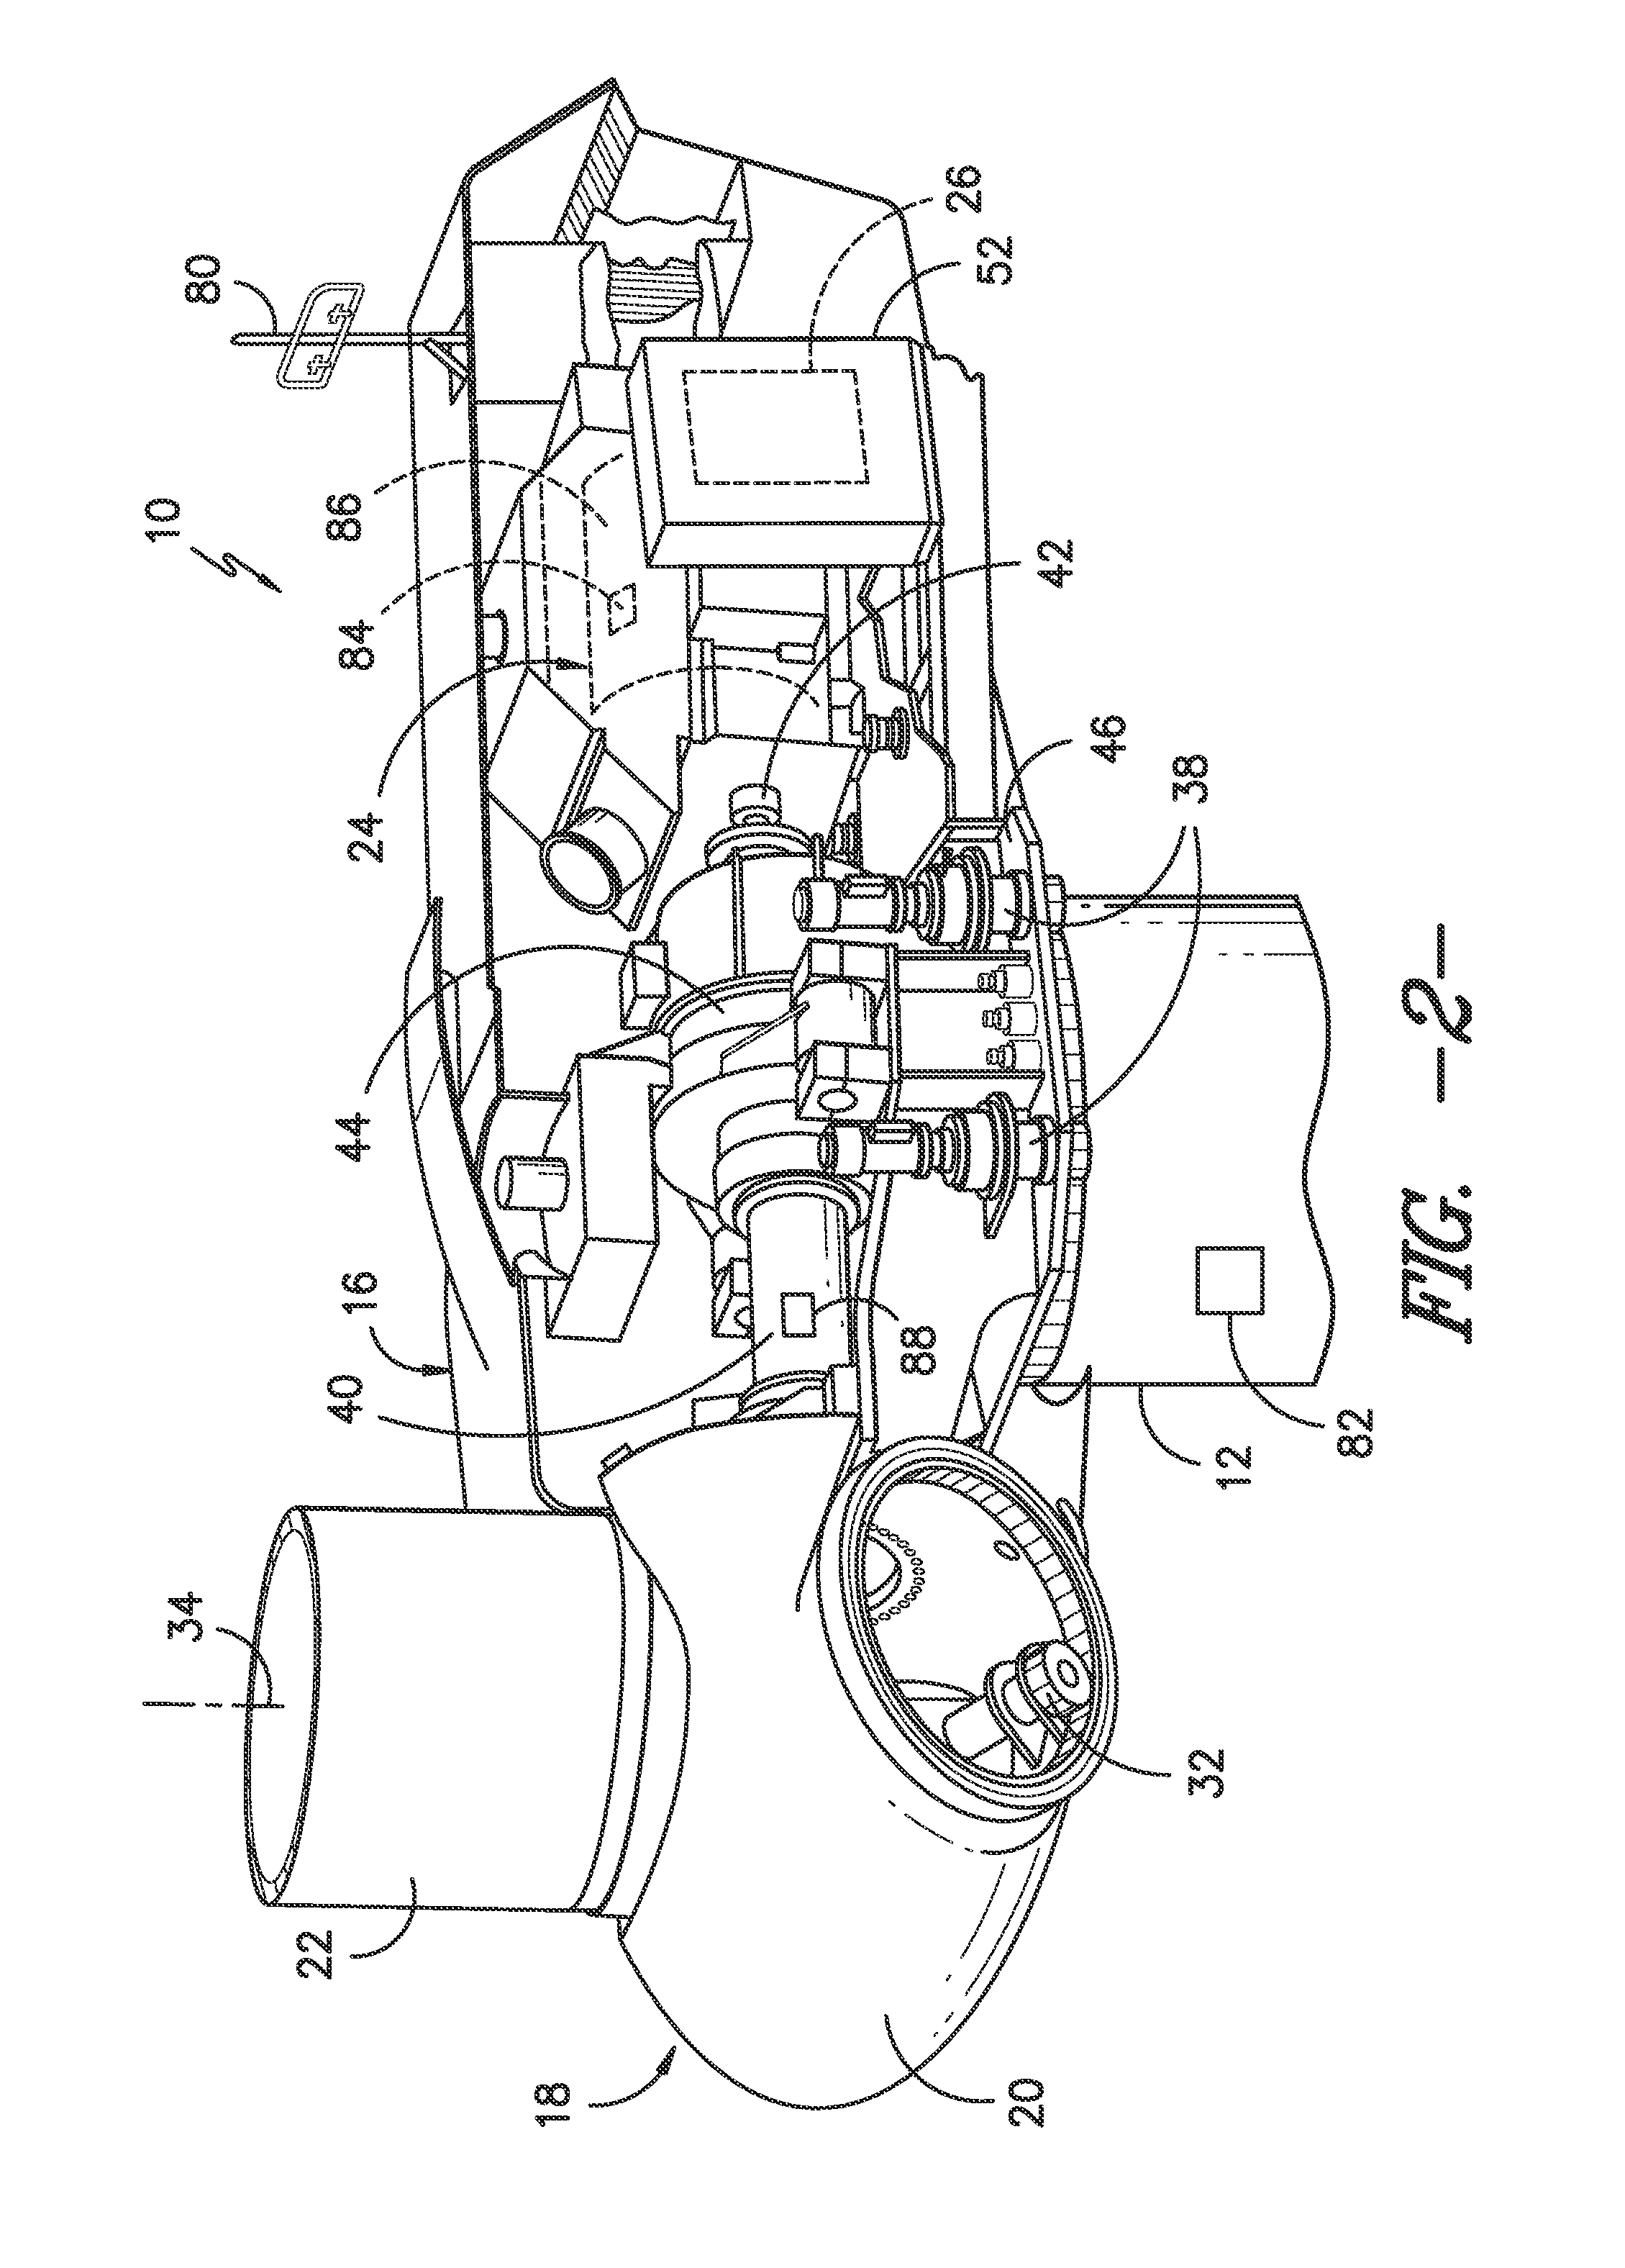 Wind turbines and methods for controlling wind turbine loading